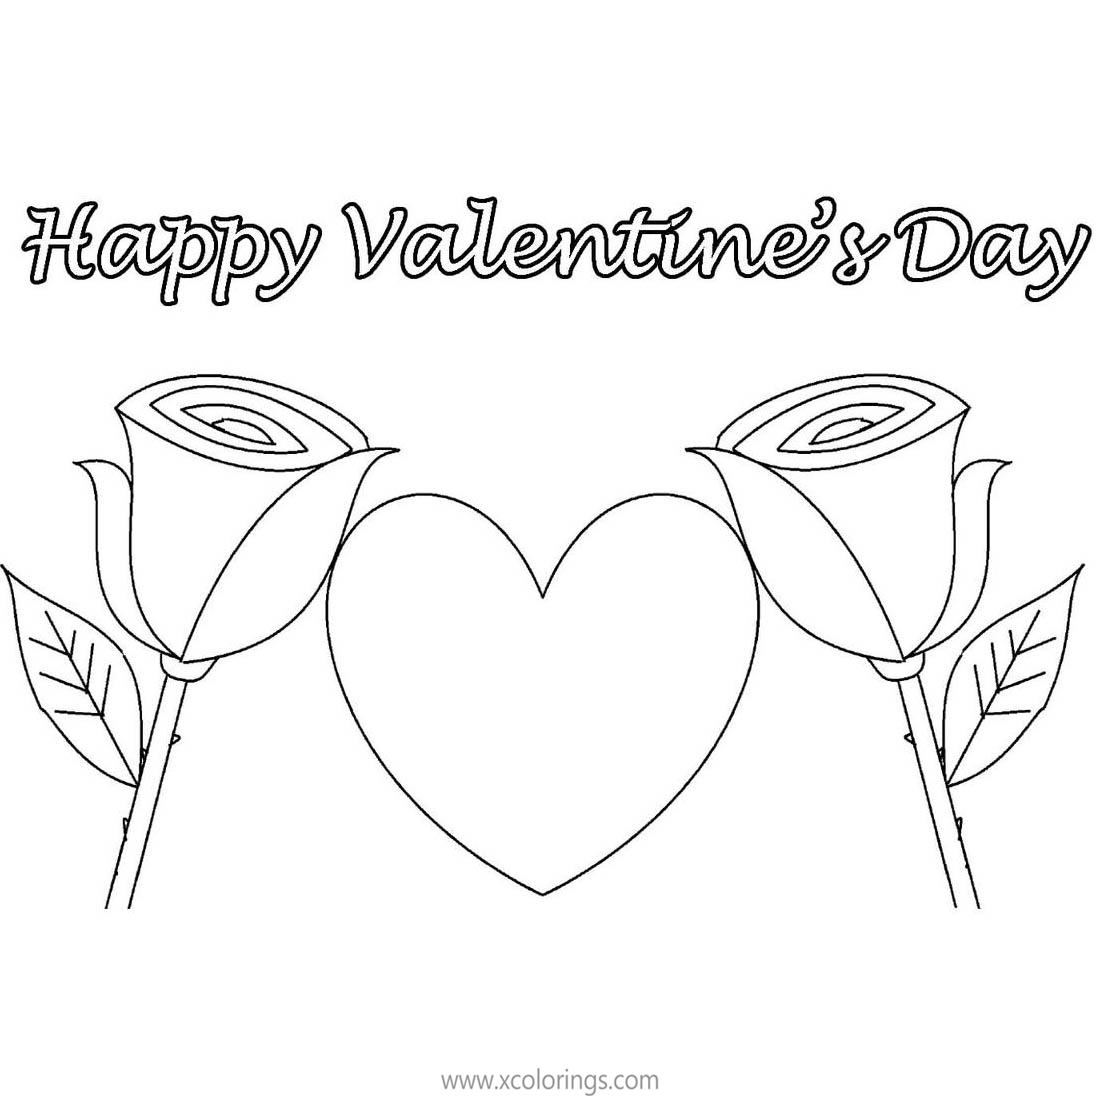 Free Valentines Day Heart with Two Roses Coloring Pages printable